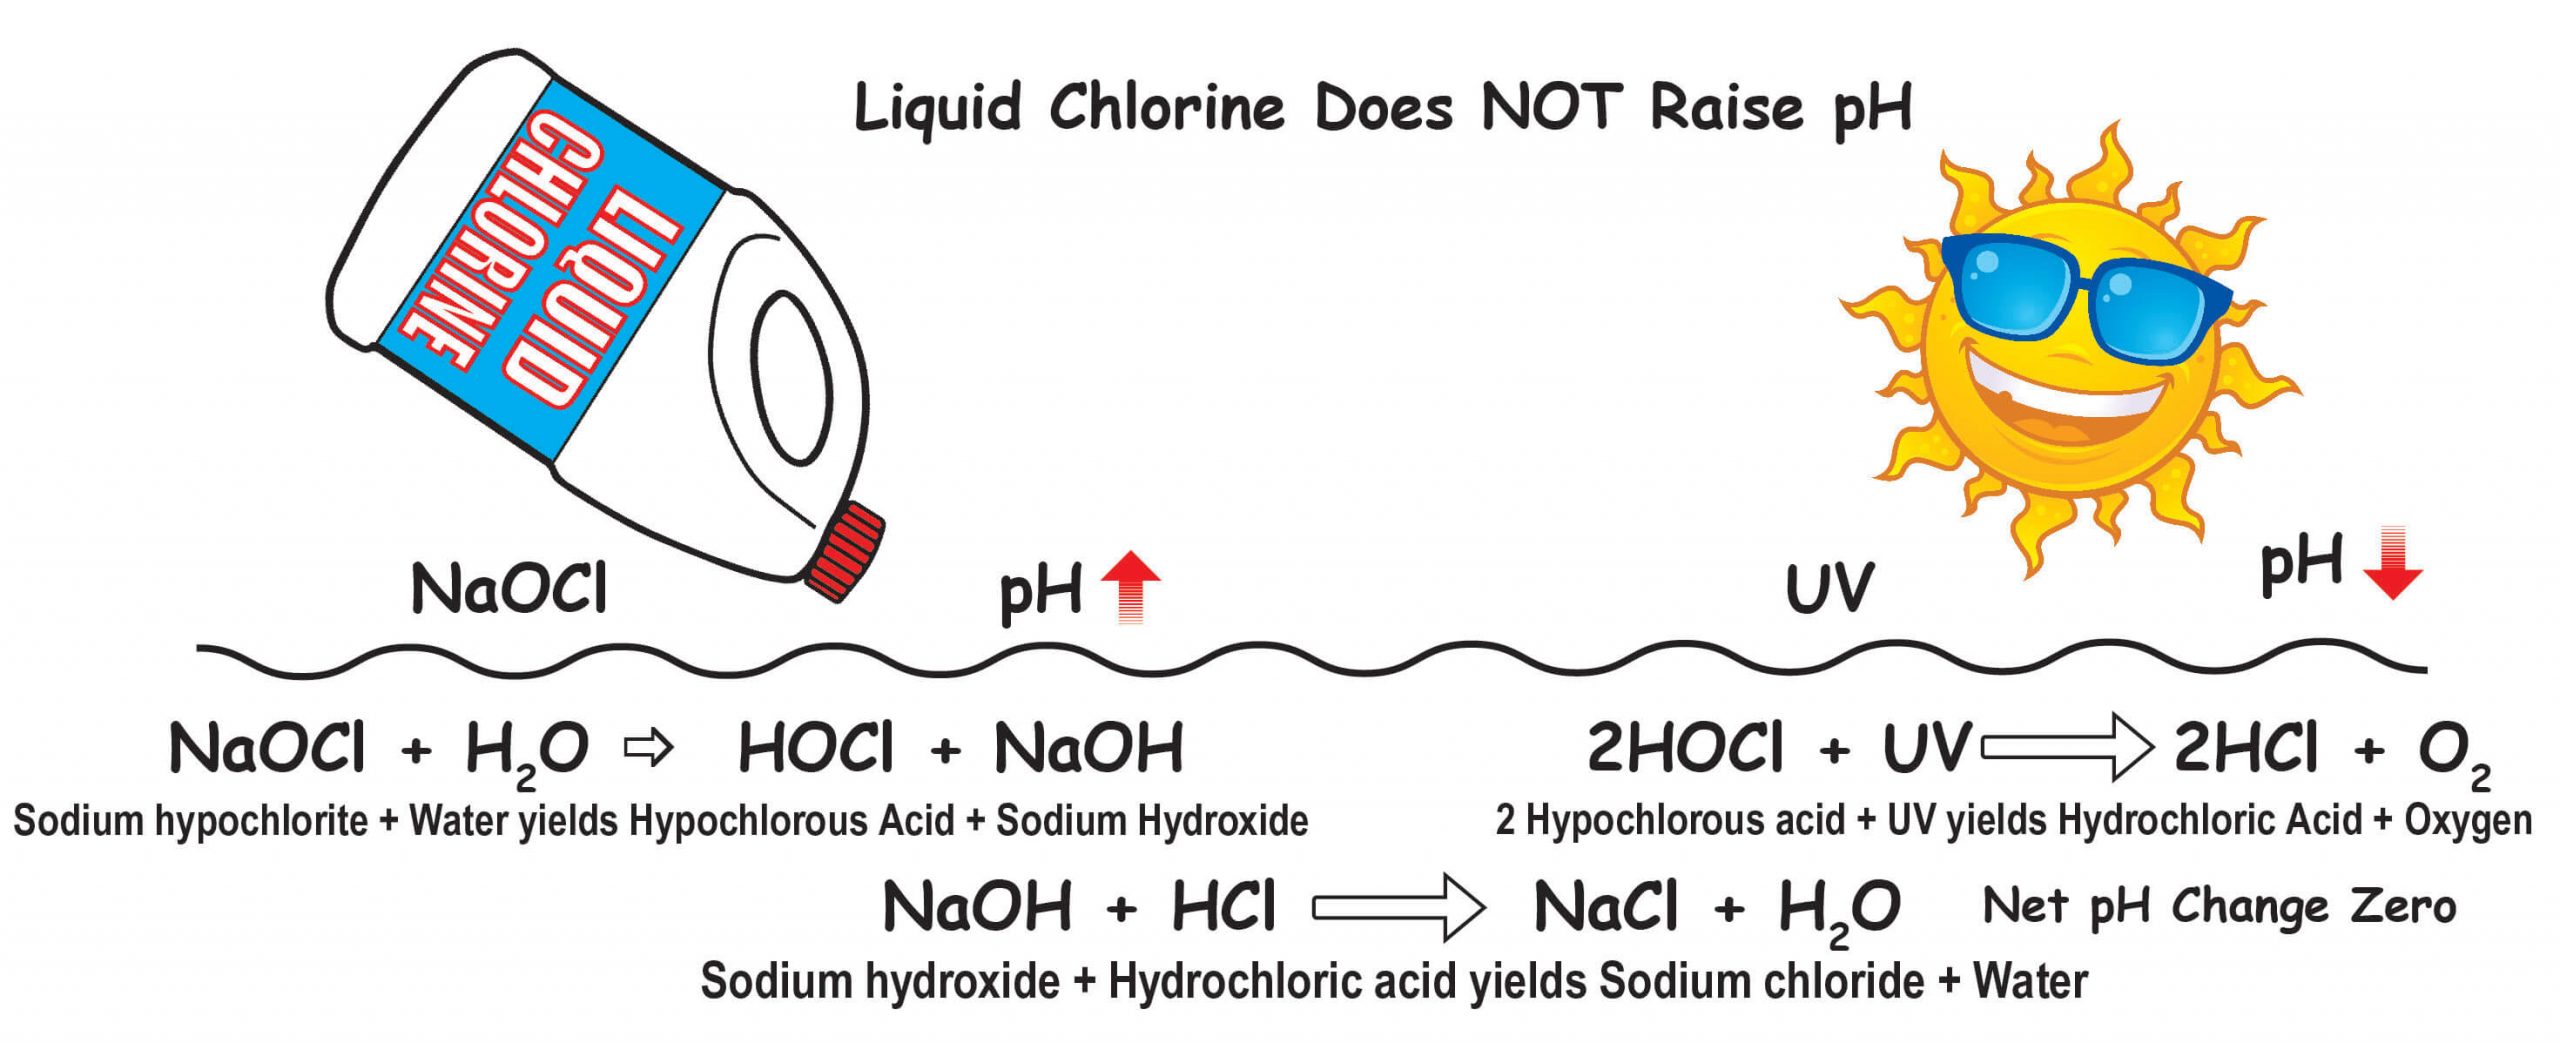 Liquid Chlorine does not raise pH color 010918 1 scaled